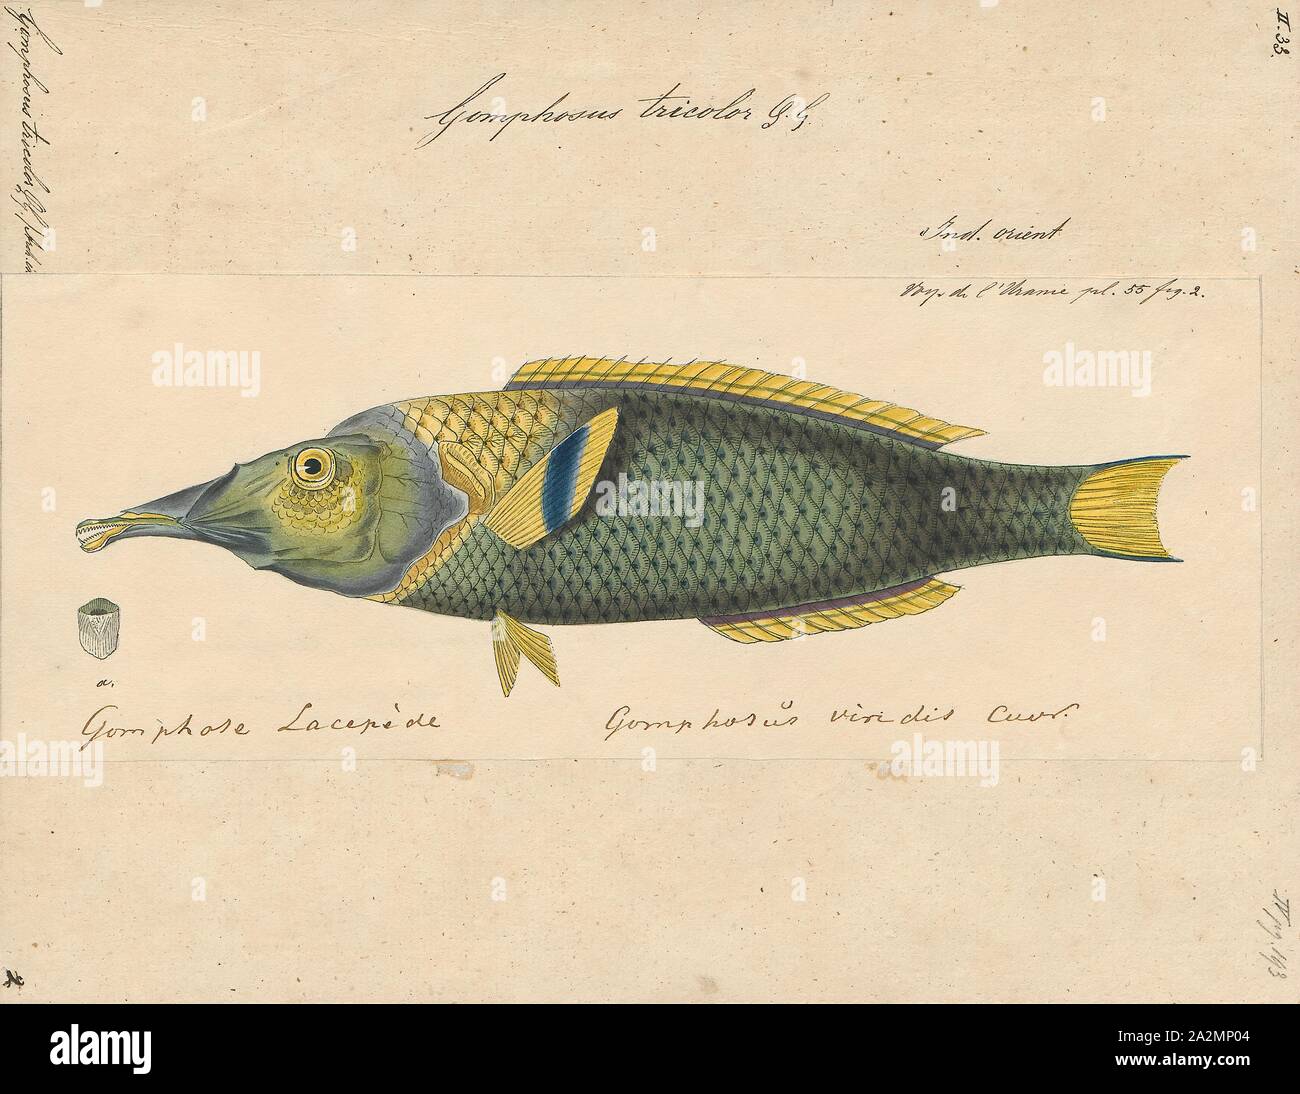 Gomphosus tricolor, Print, Gomphosus is a small genus of wrasses native to the Indian and Pacific Oceans., 1824-1839 Stock Photo